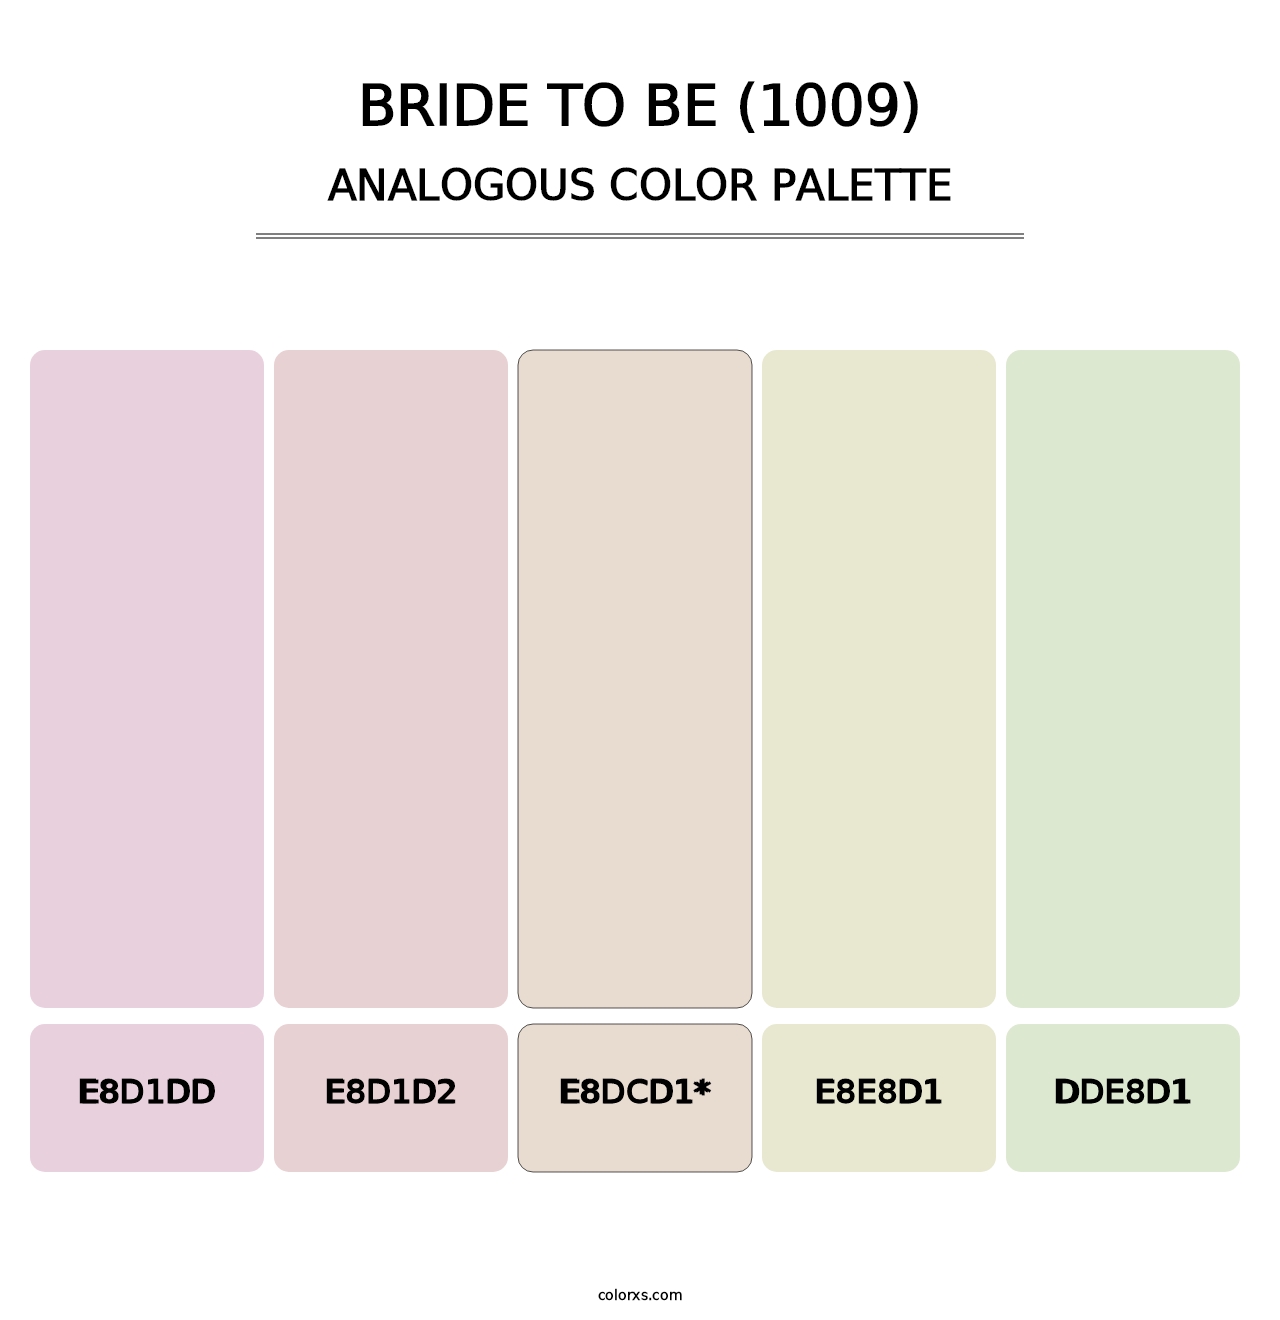 Bride To Be (1009) - Analogous Color Palette